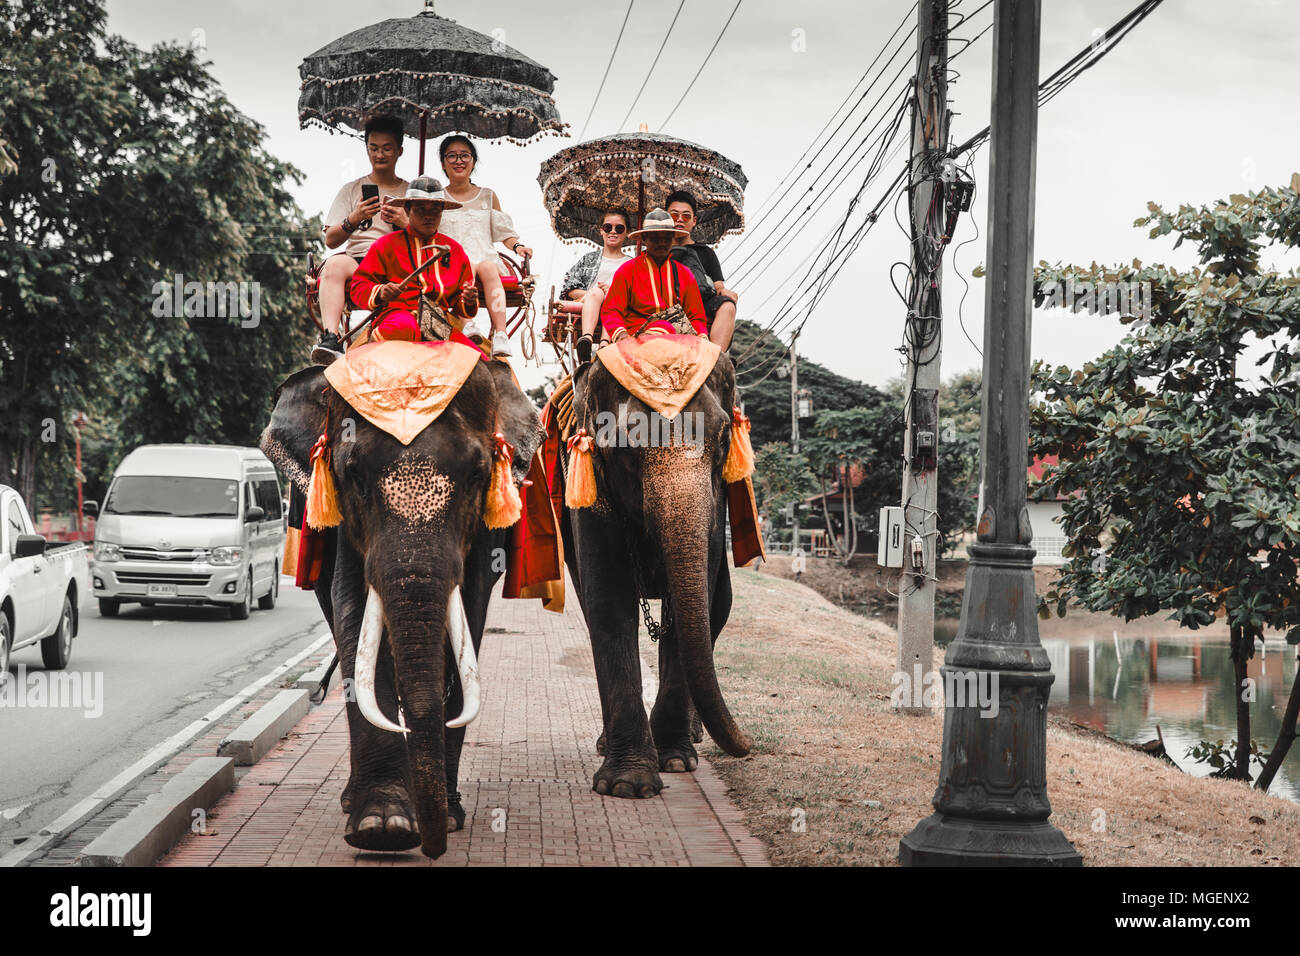 Two elephants used as a tourist attraction used to transport people crossing the street in the center of Ayutthaya blocking traffic in the streets Stock Photo